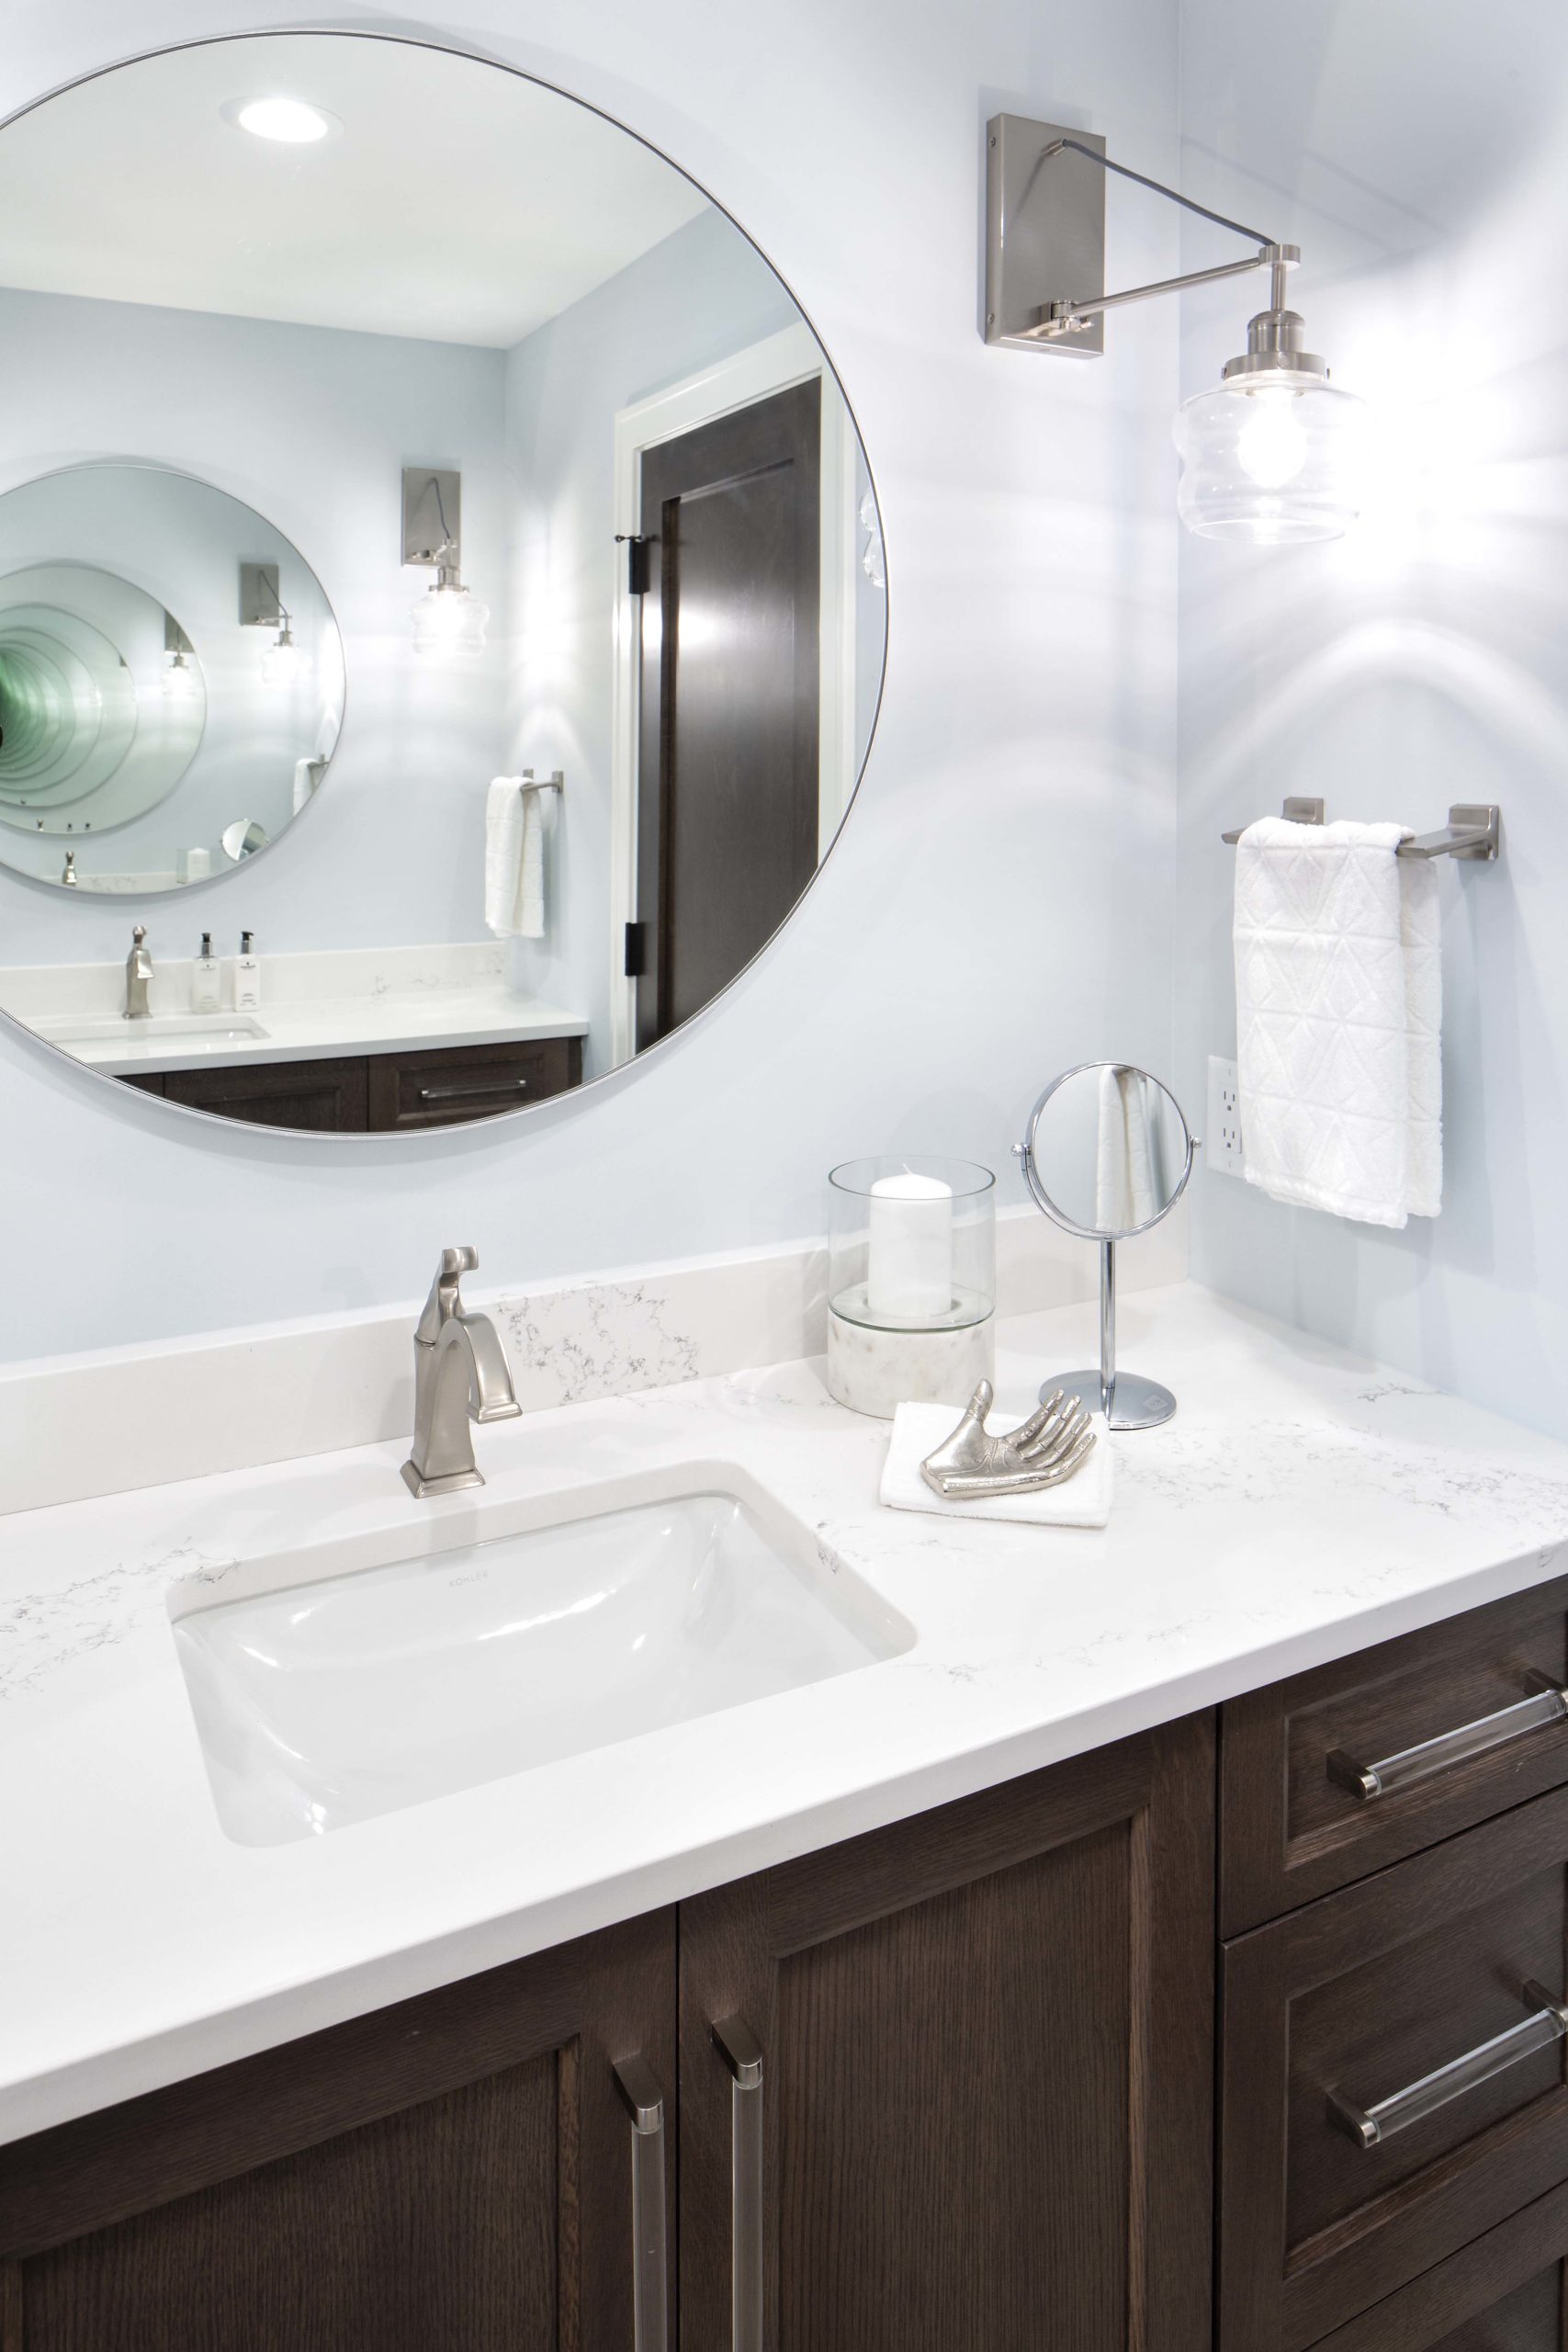 bathroom vanity with brown cabinets, white coutnertops, and a round mirror above